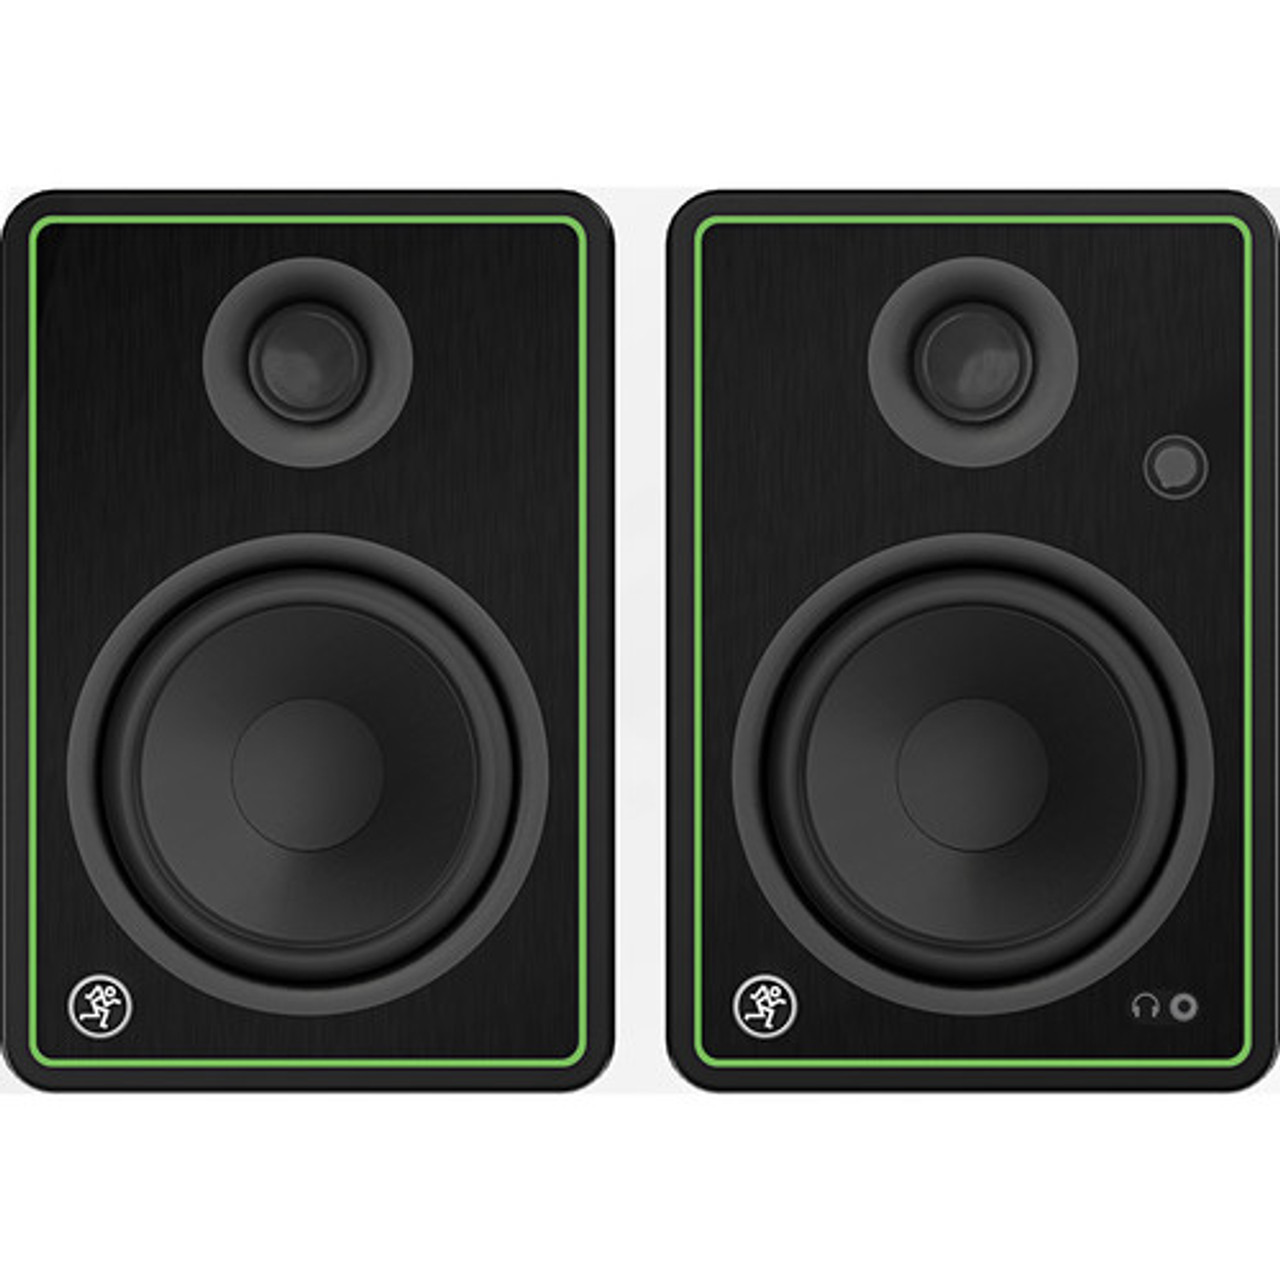 Mackie CR5-XBT Creative Reference Series 5" Multimedia Monitors with Bluetooth (Pair) (CR5-XBT)